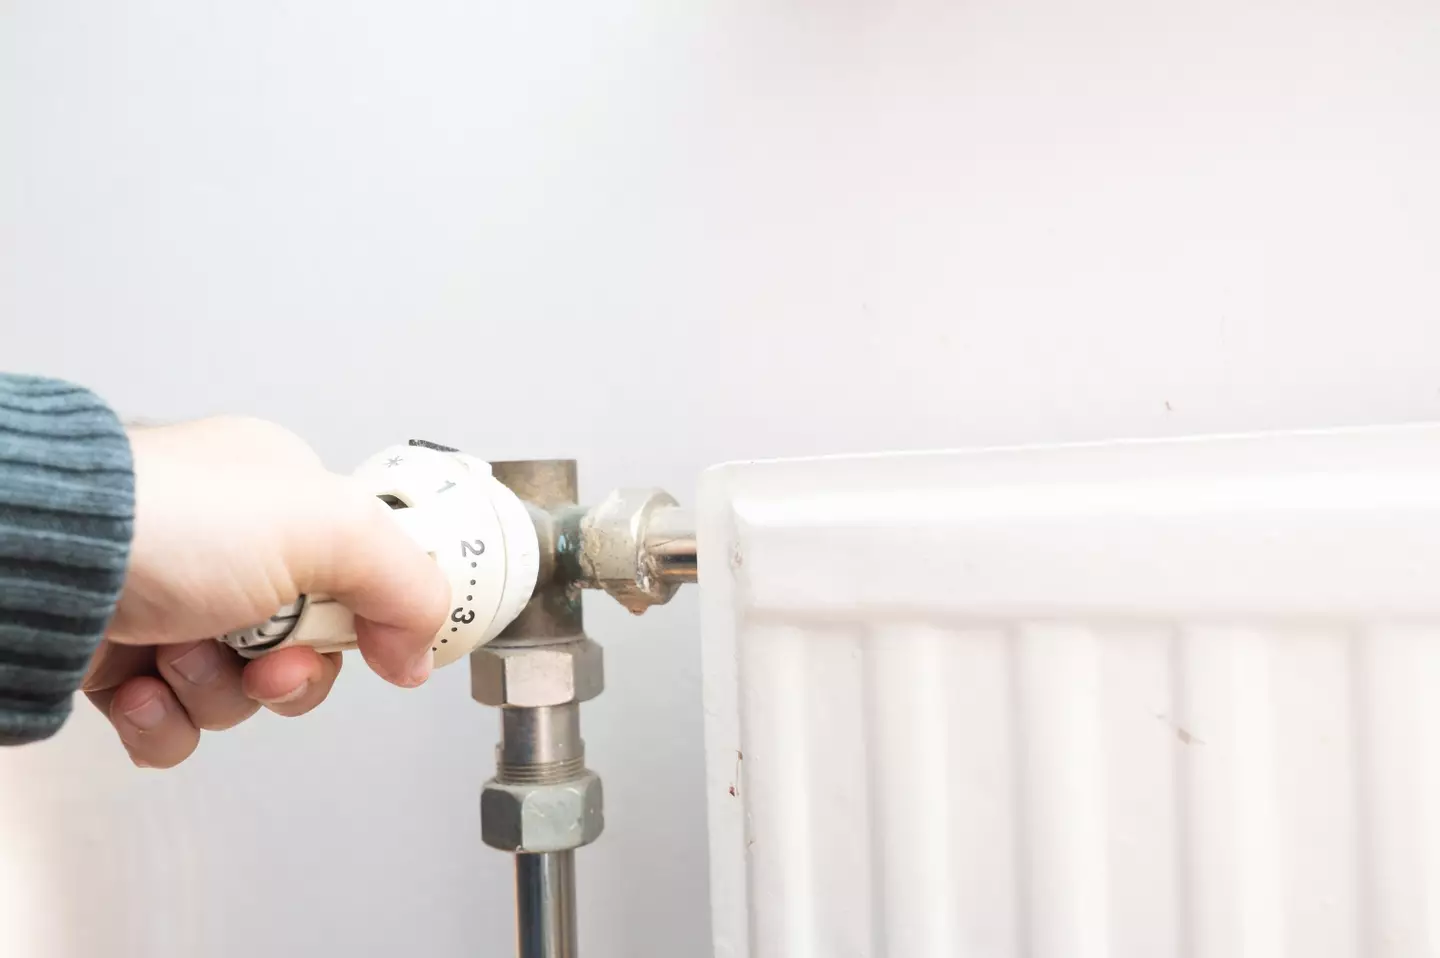 An expert has shared exactly when you should turn your heating on this month.